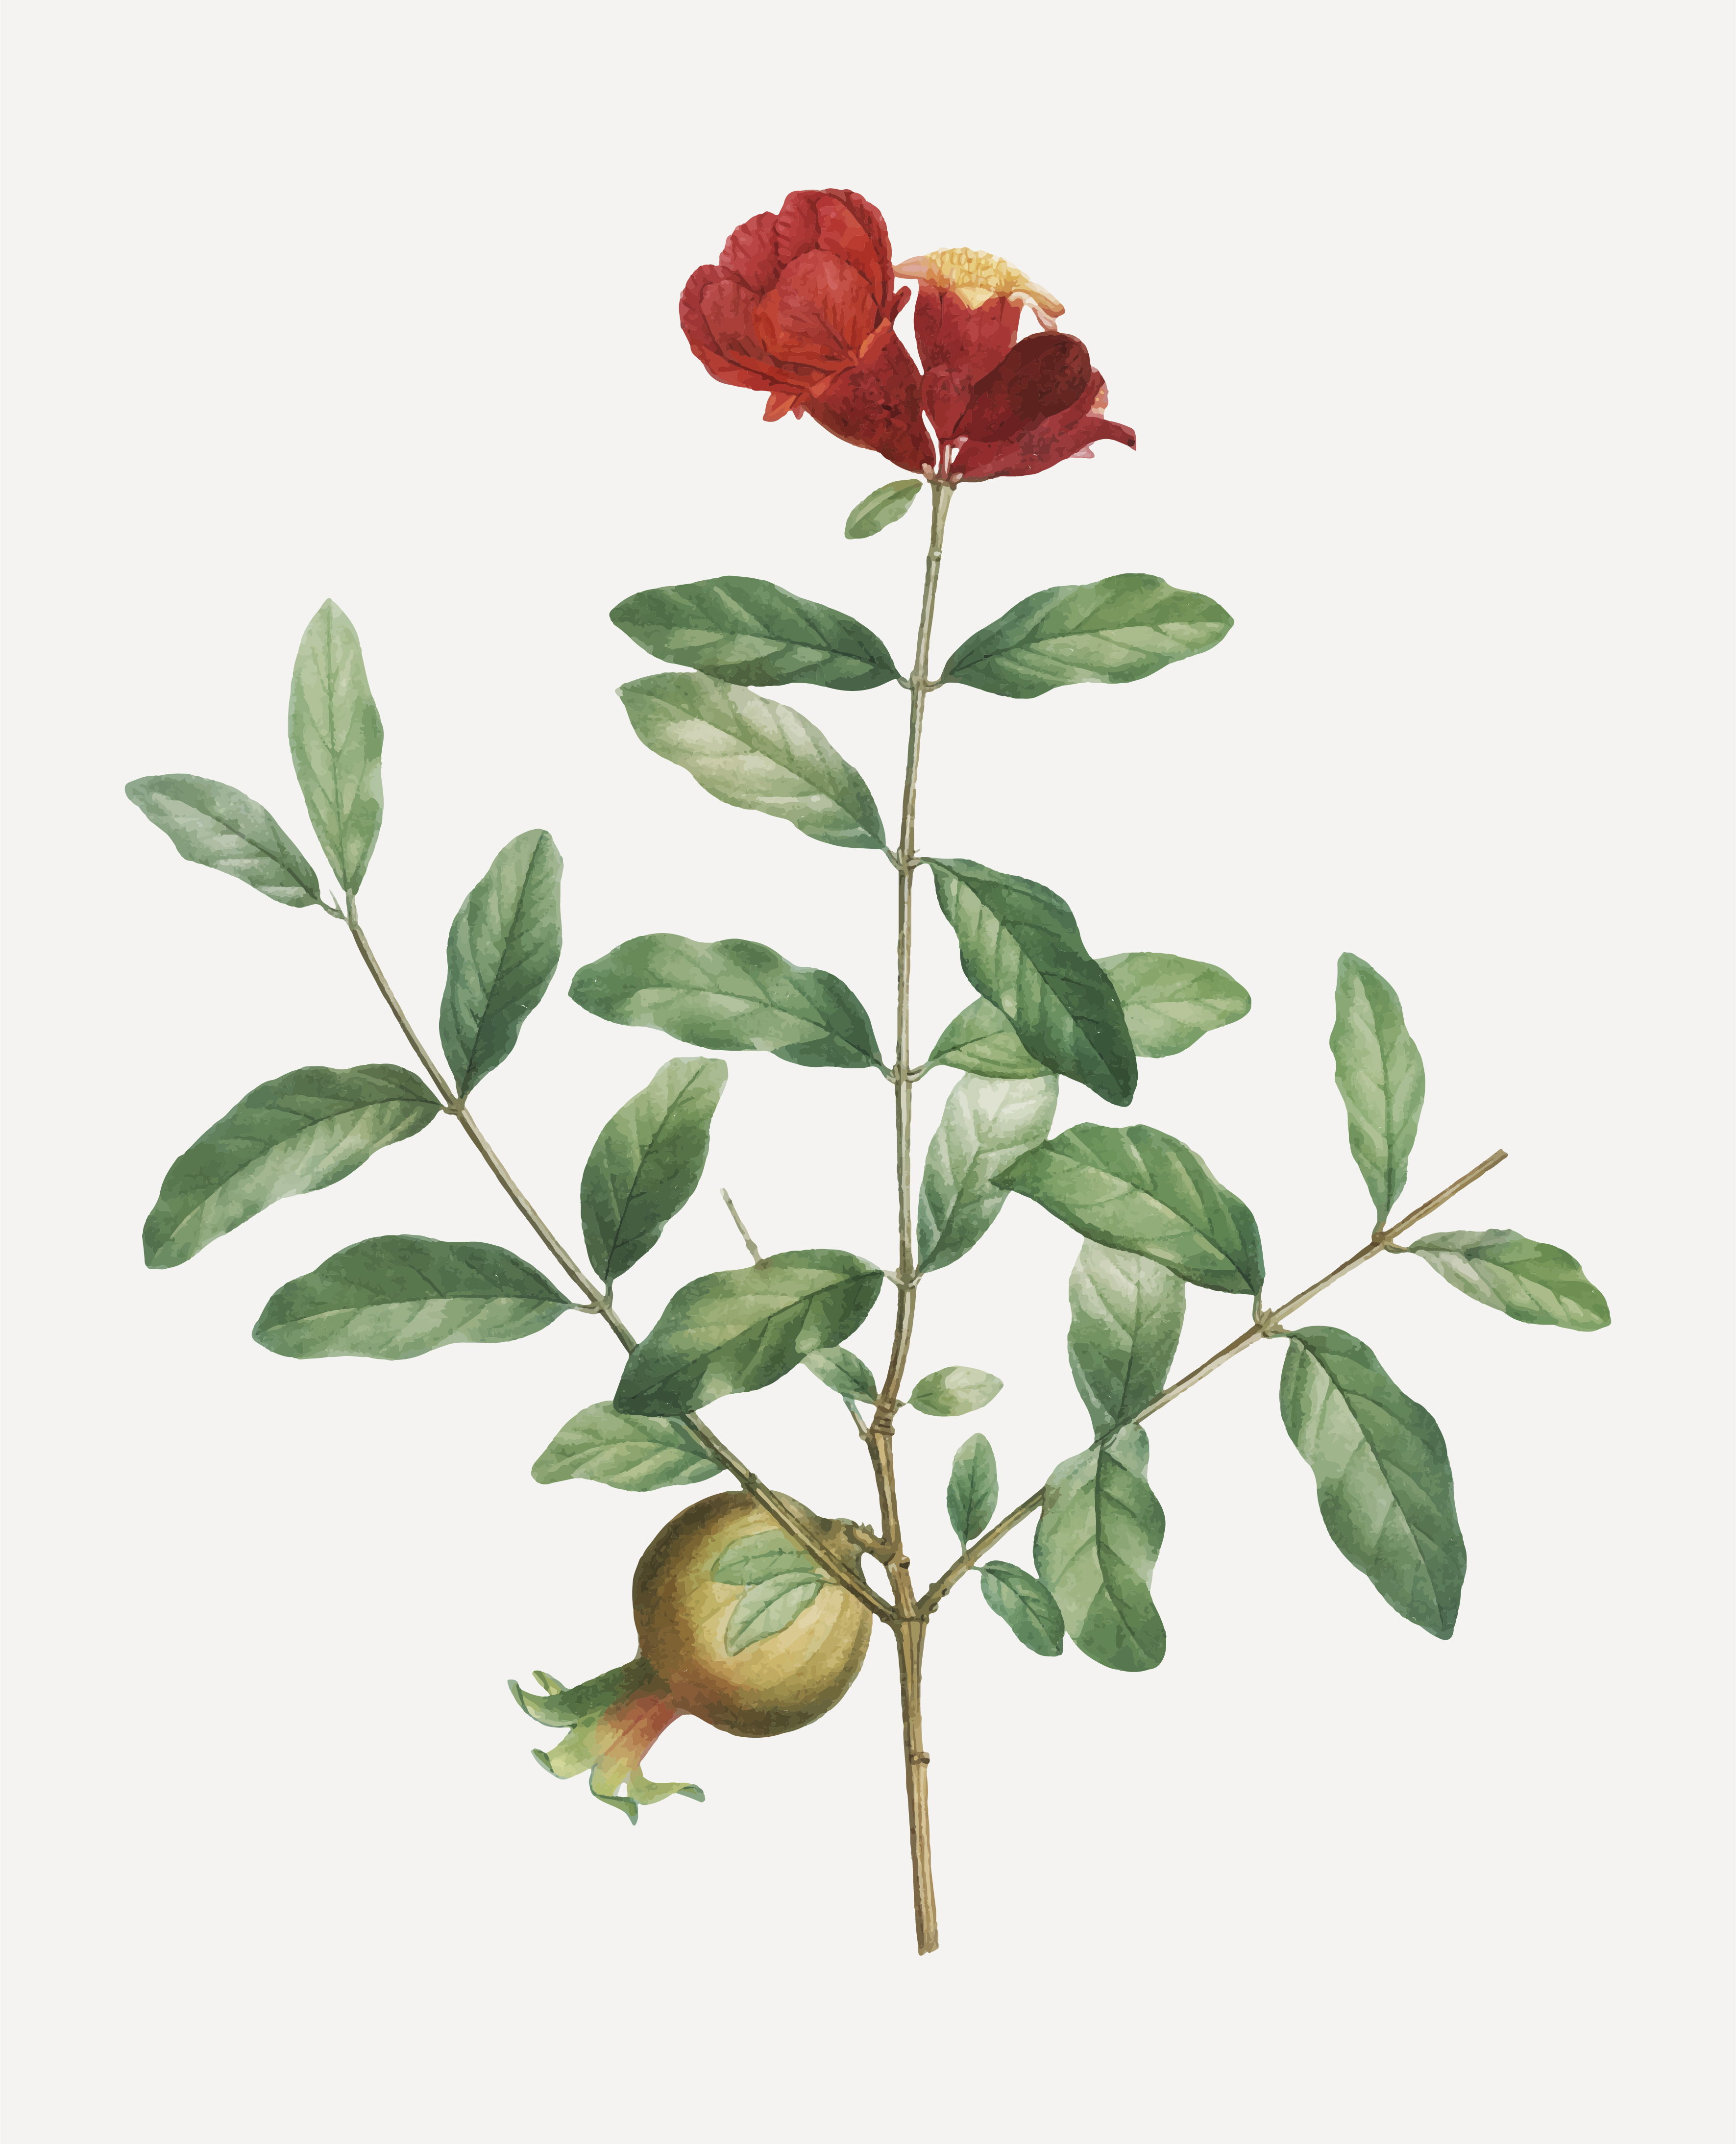 Download Pomegranate tree branch - Download Free Vectors, Clipart ...